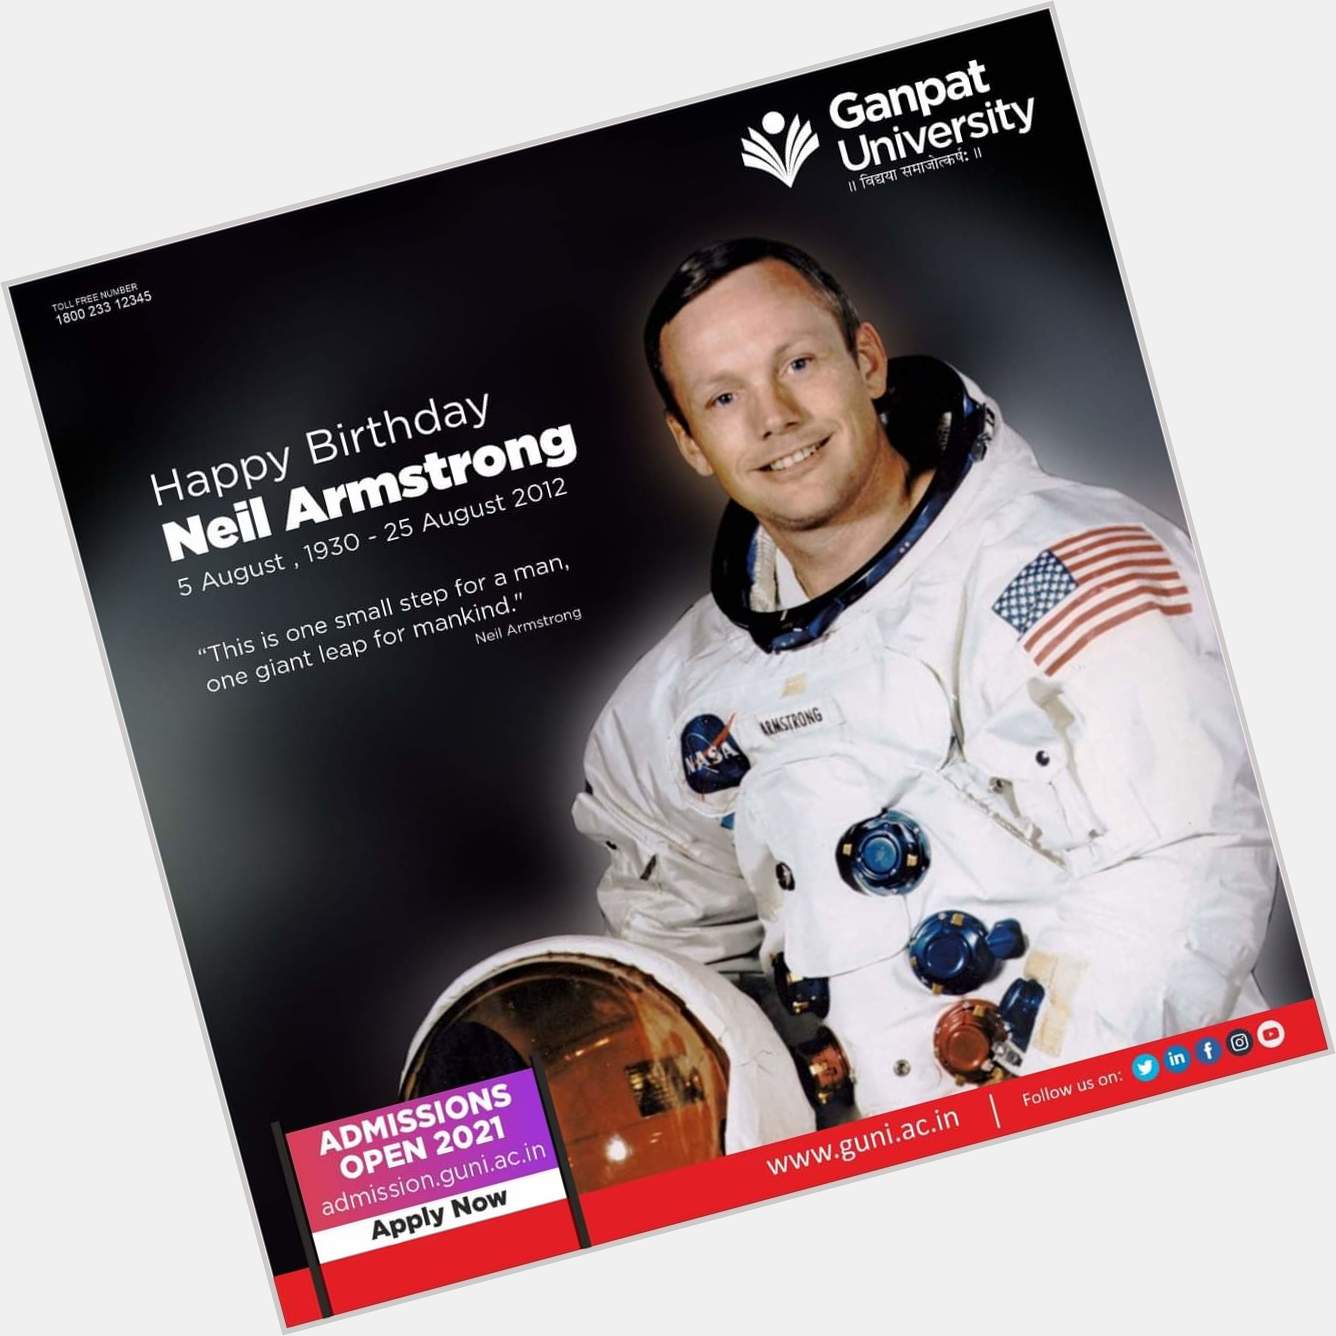 Happy birthday *Neil Armstrong*  